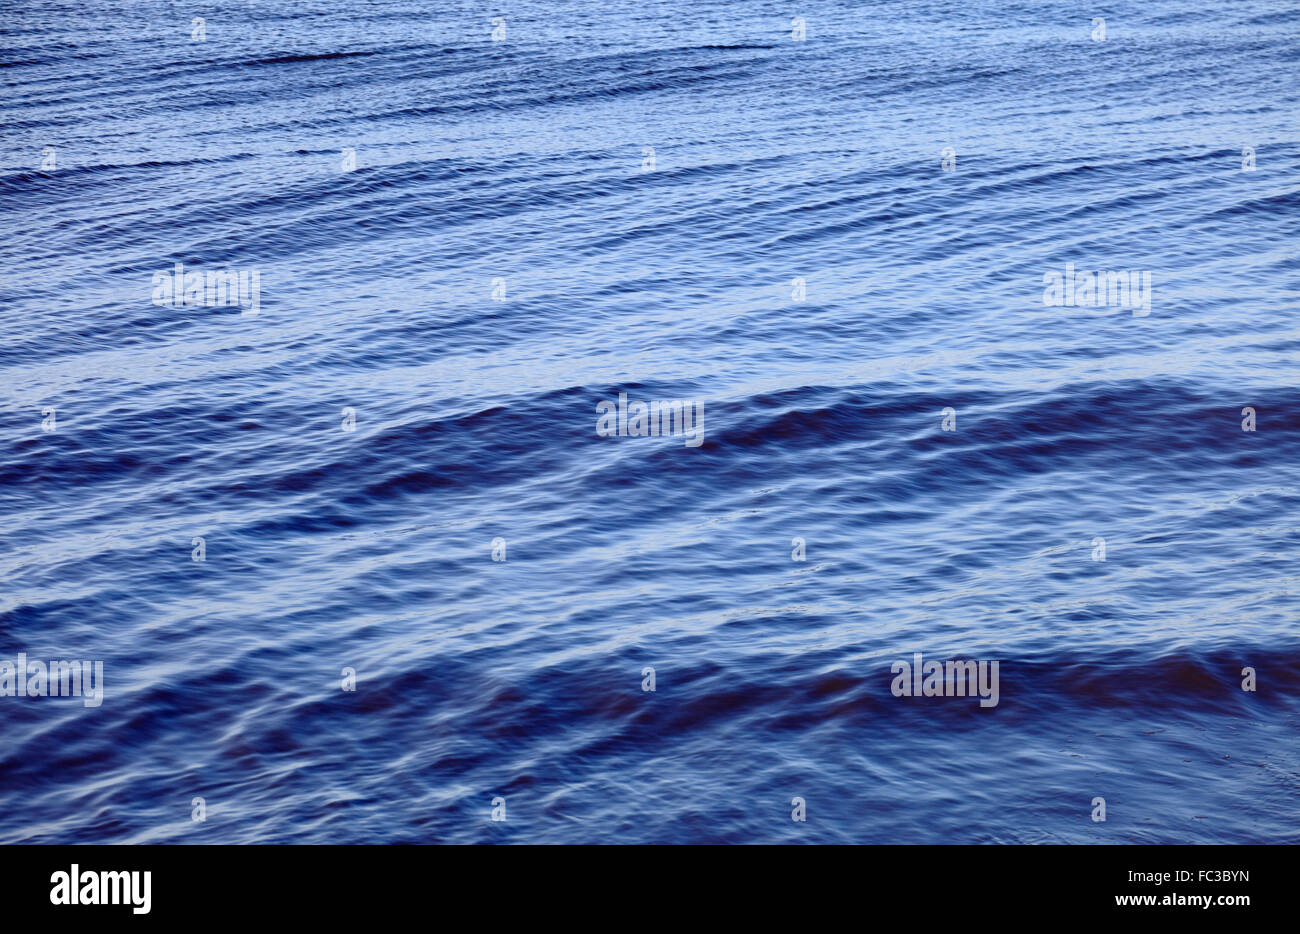 The surface of the sea. Stock Photo